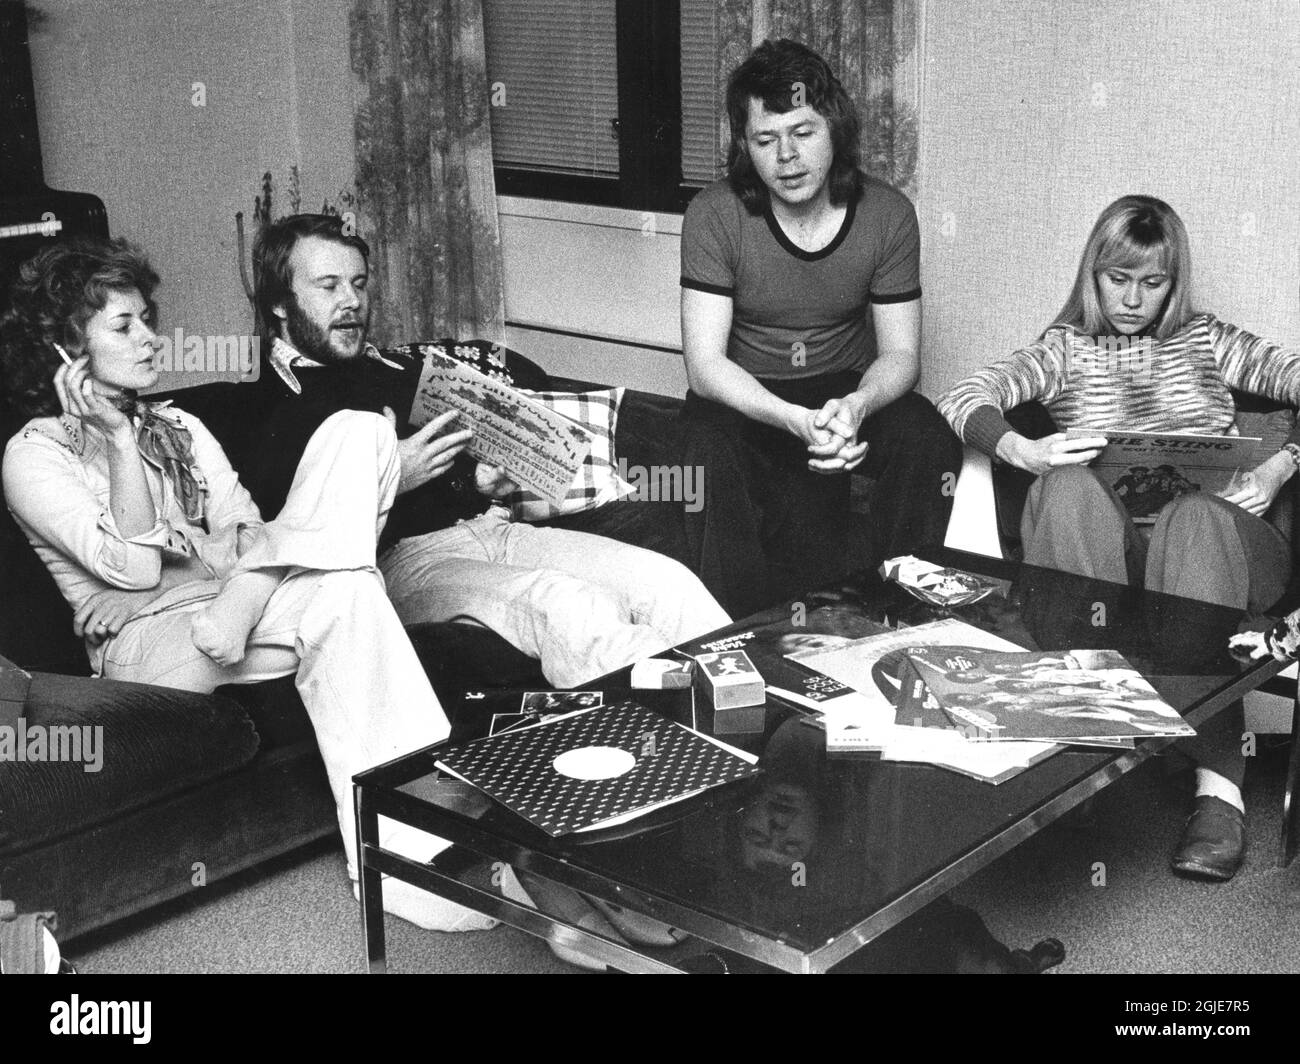 Anni-Frid Lyngstad, Benny Andersson sitting in a sofa, smoking and listening to records in Bjorn Ulvaeus and Agnetha Faltskog's apartment in Stockholm, Sweden, March 27, 1974. Photo: Jonny Graan / Expressen / TT / code 16  Stock Photo